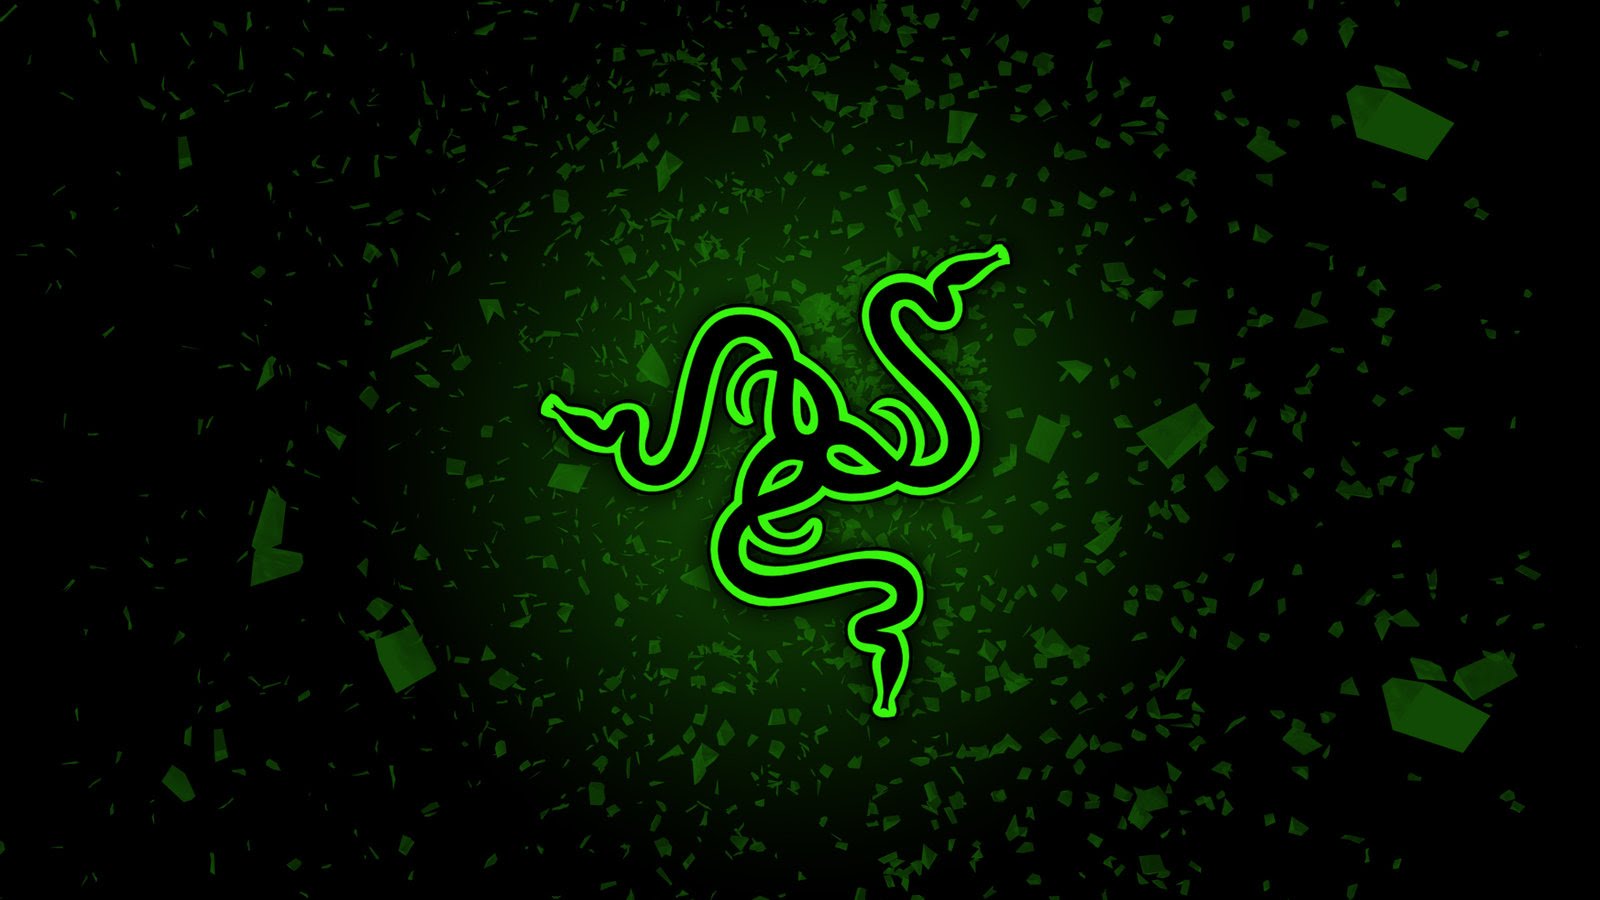 RAZER TO LAUNCH “PAID TO PLAY” INITIATIVE TO REWARD FANS FOR PLAYING GAMES